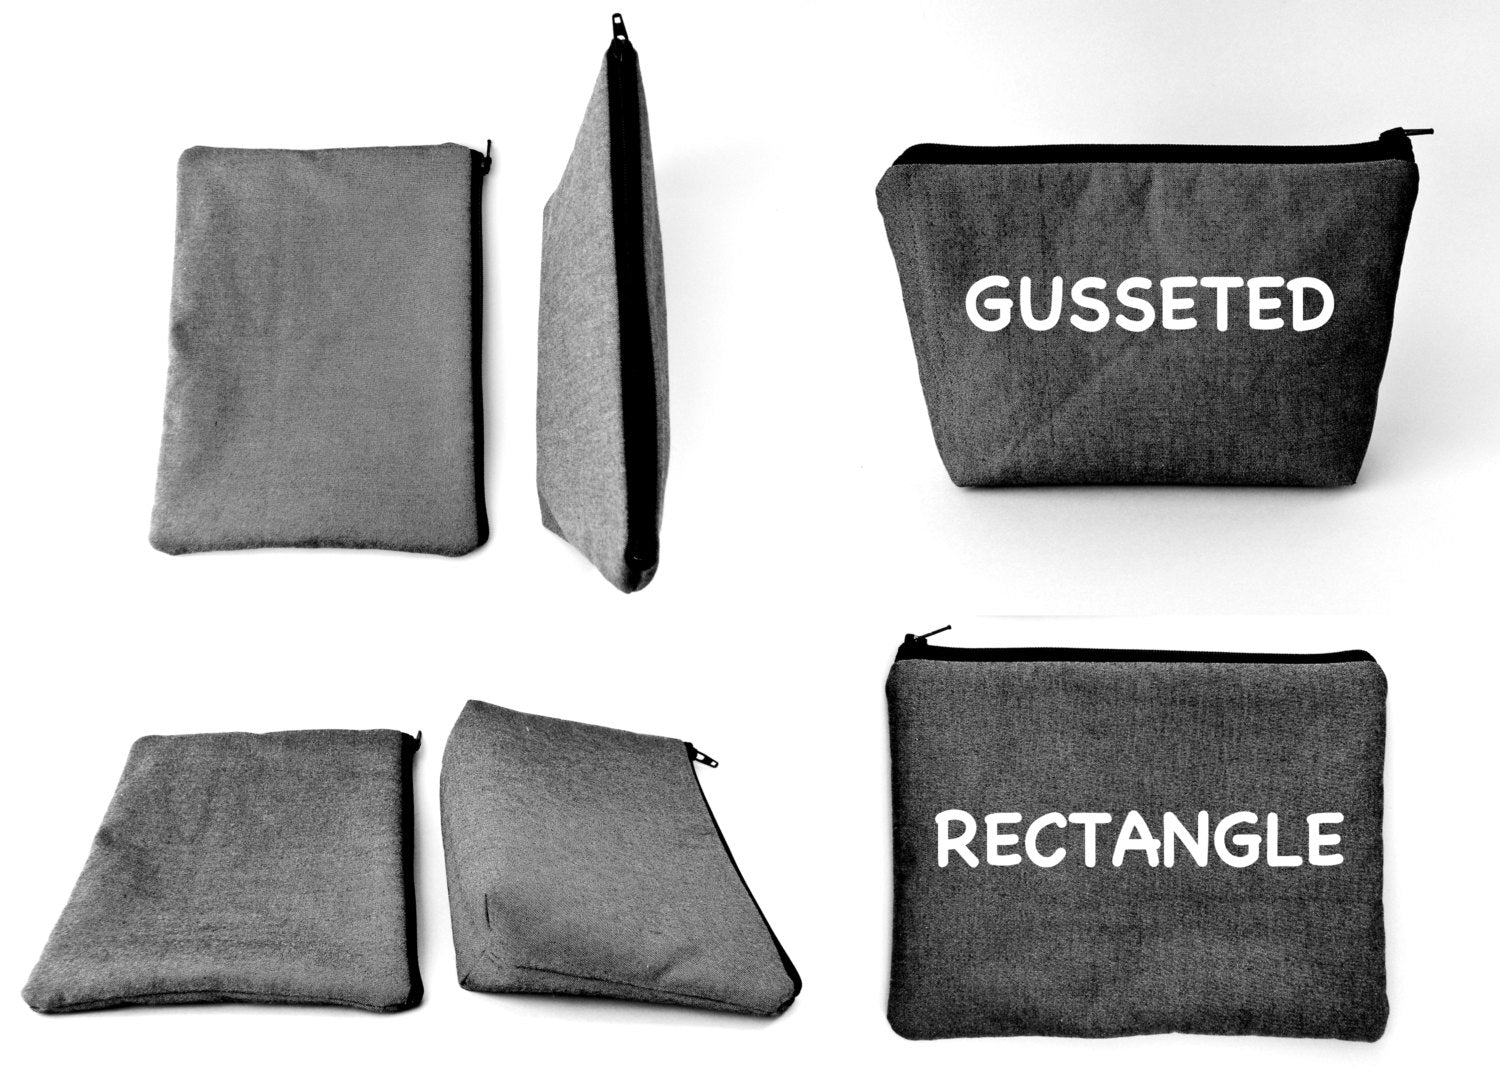 Bag style examples Gusseted and Rectangle